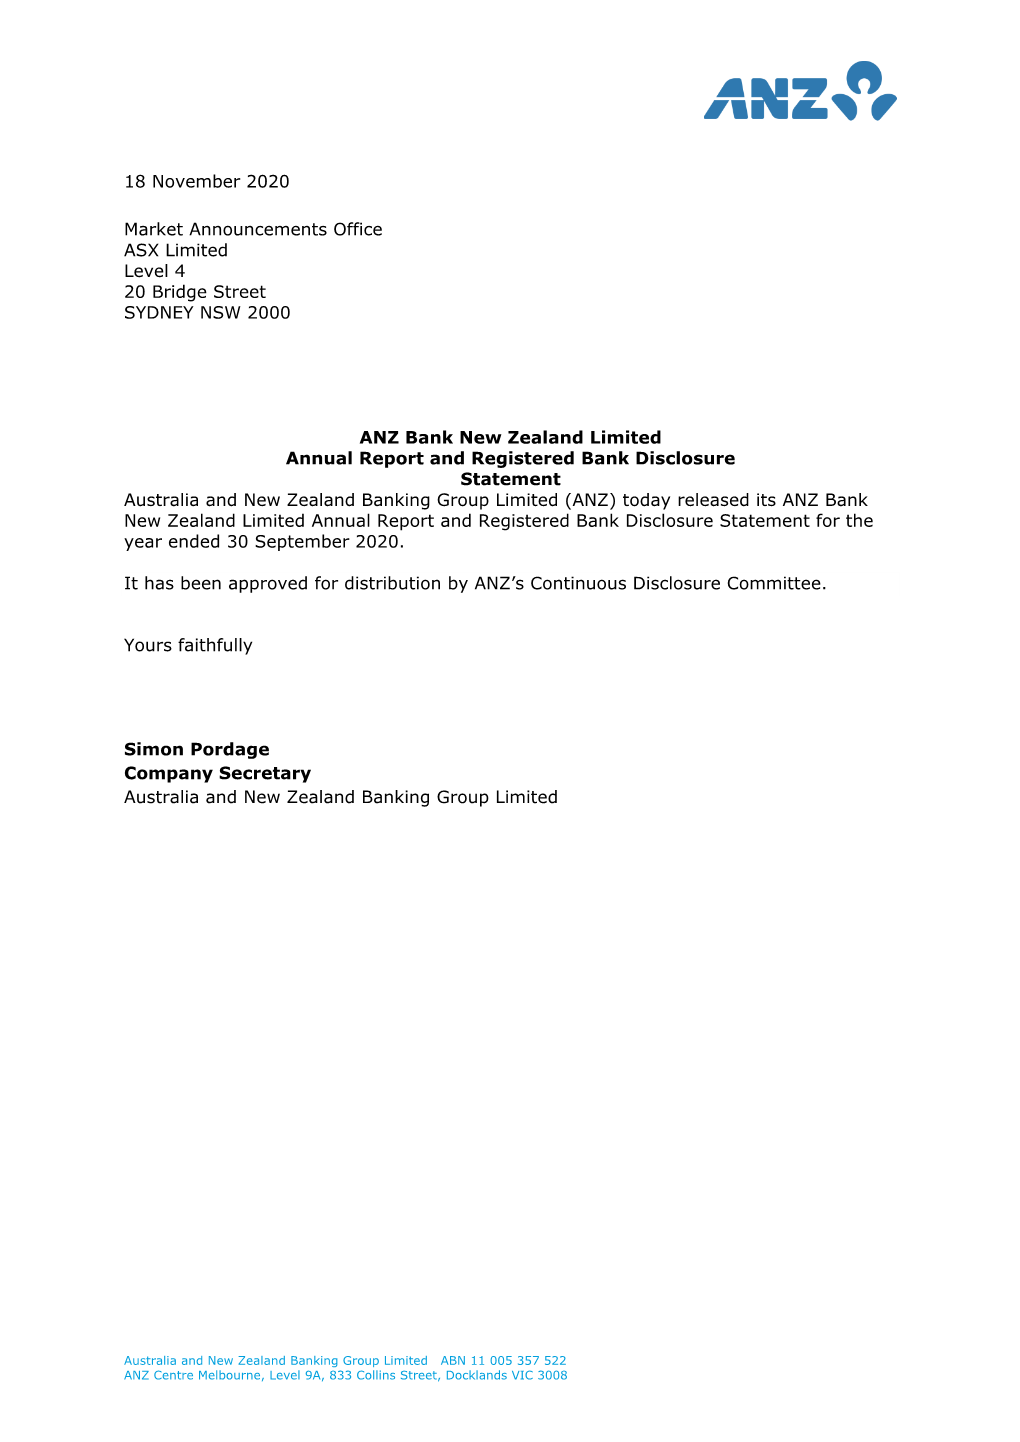 18 November 2020 Market Announcements Office ASX Limited